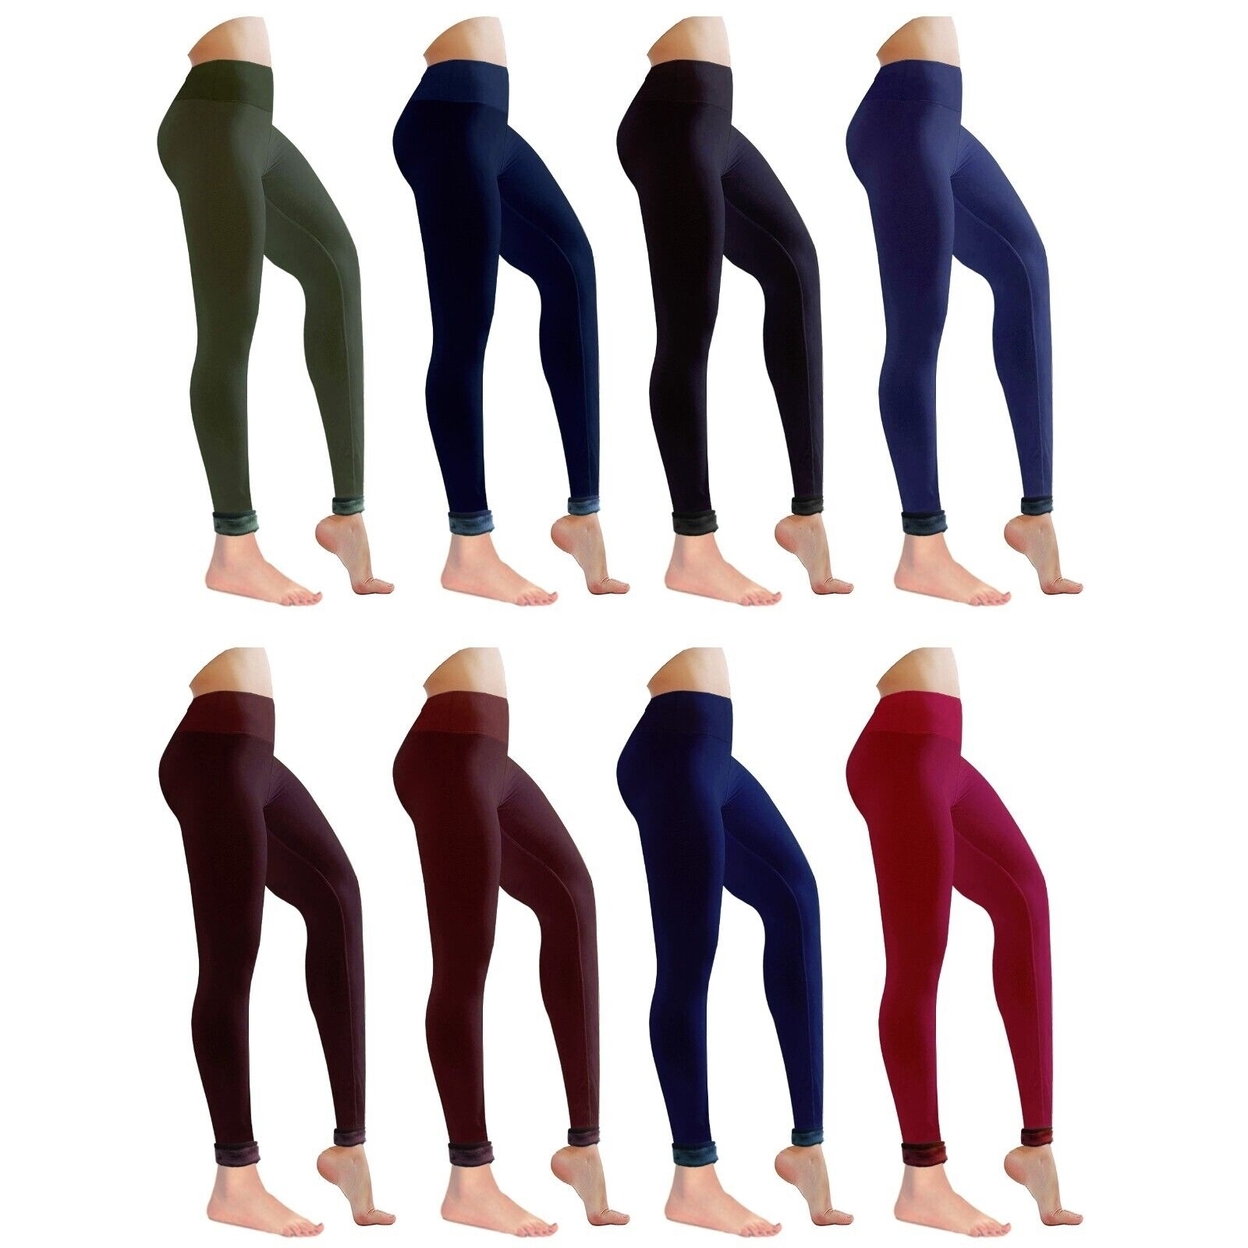 Multi-Pack: Women's Winter Warm Ultra Soft Cozy Fur Lined Leggings - Assorted, 3-pack, Large